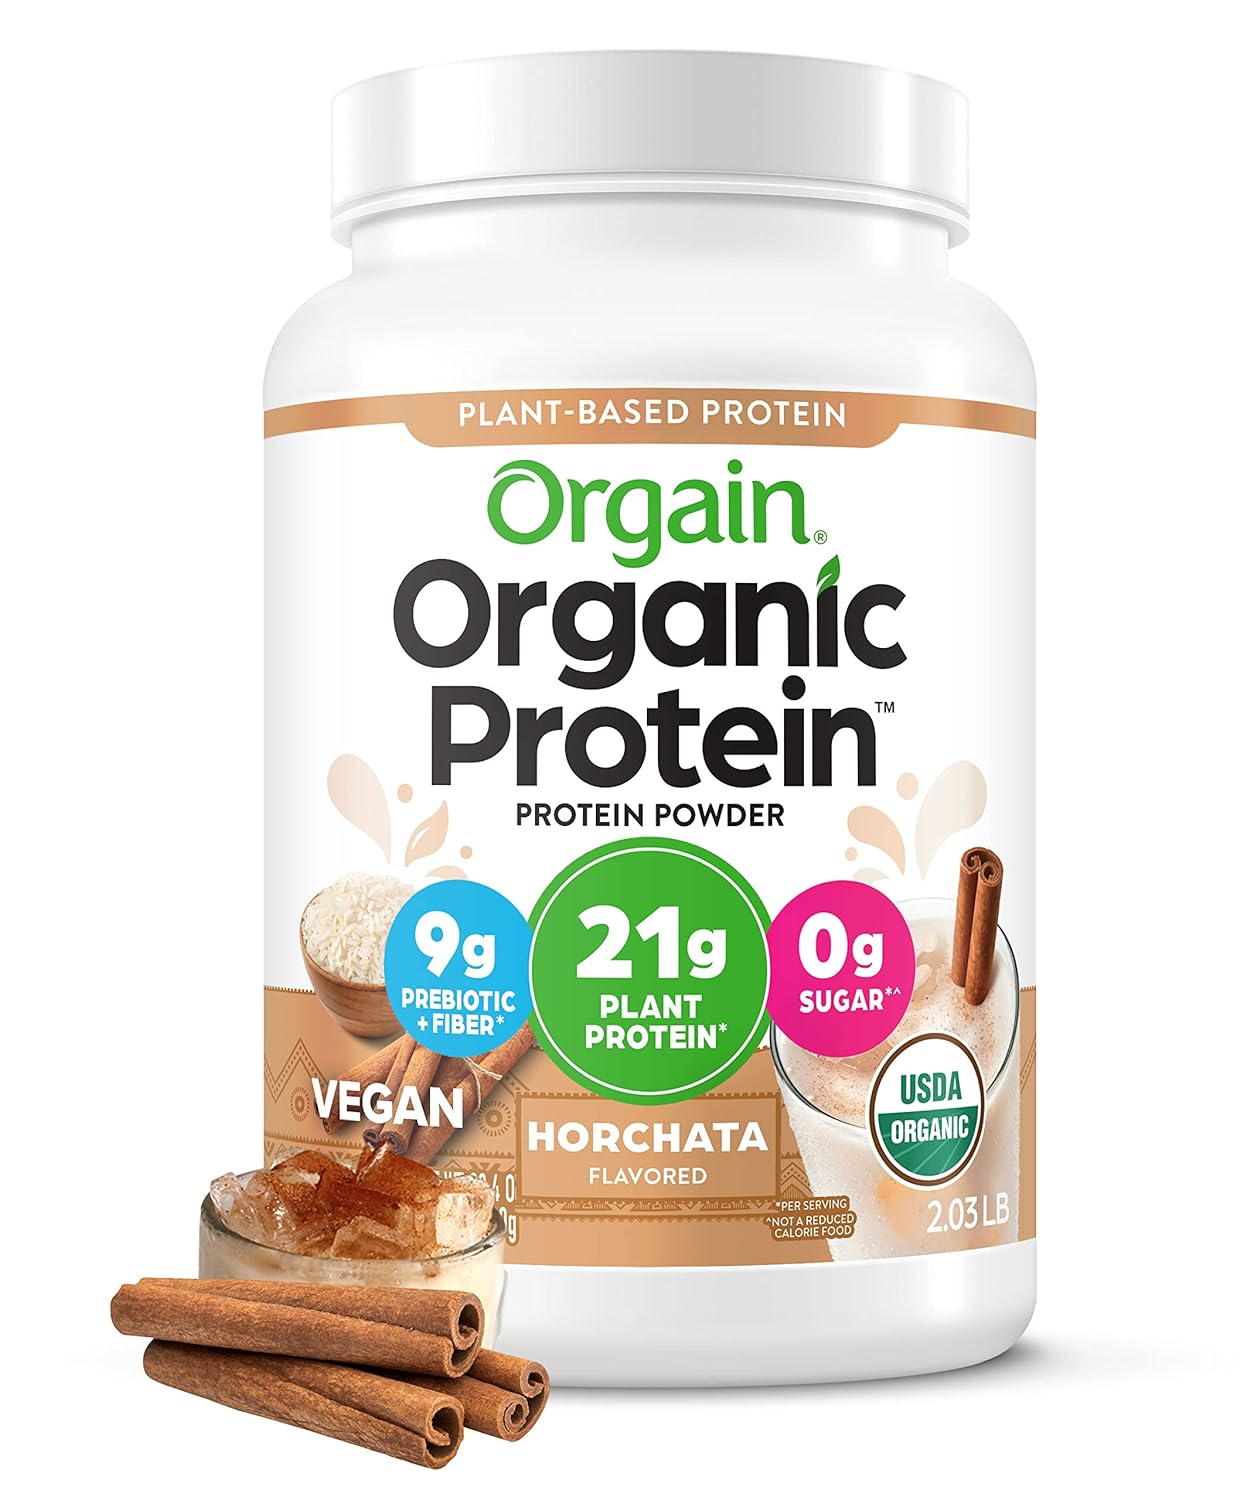 Orgain Organic Vegan Protein Powder, Horchata - 21g of Plant Based Protein, Low Net Carbs, Gluten Free, Lactose No Sugar Added, Soy Kosher, Non-GMO, 2.03 Lb